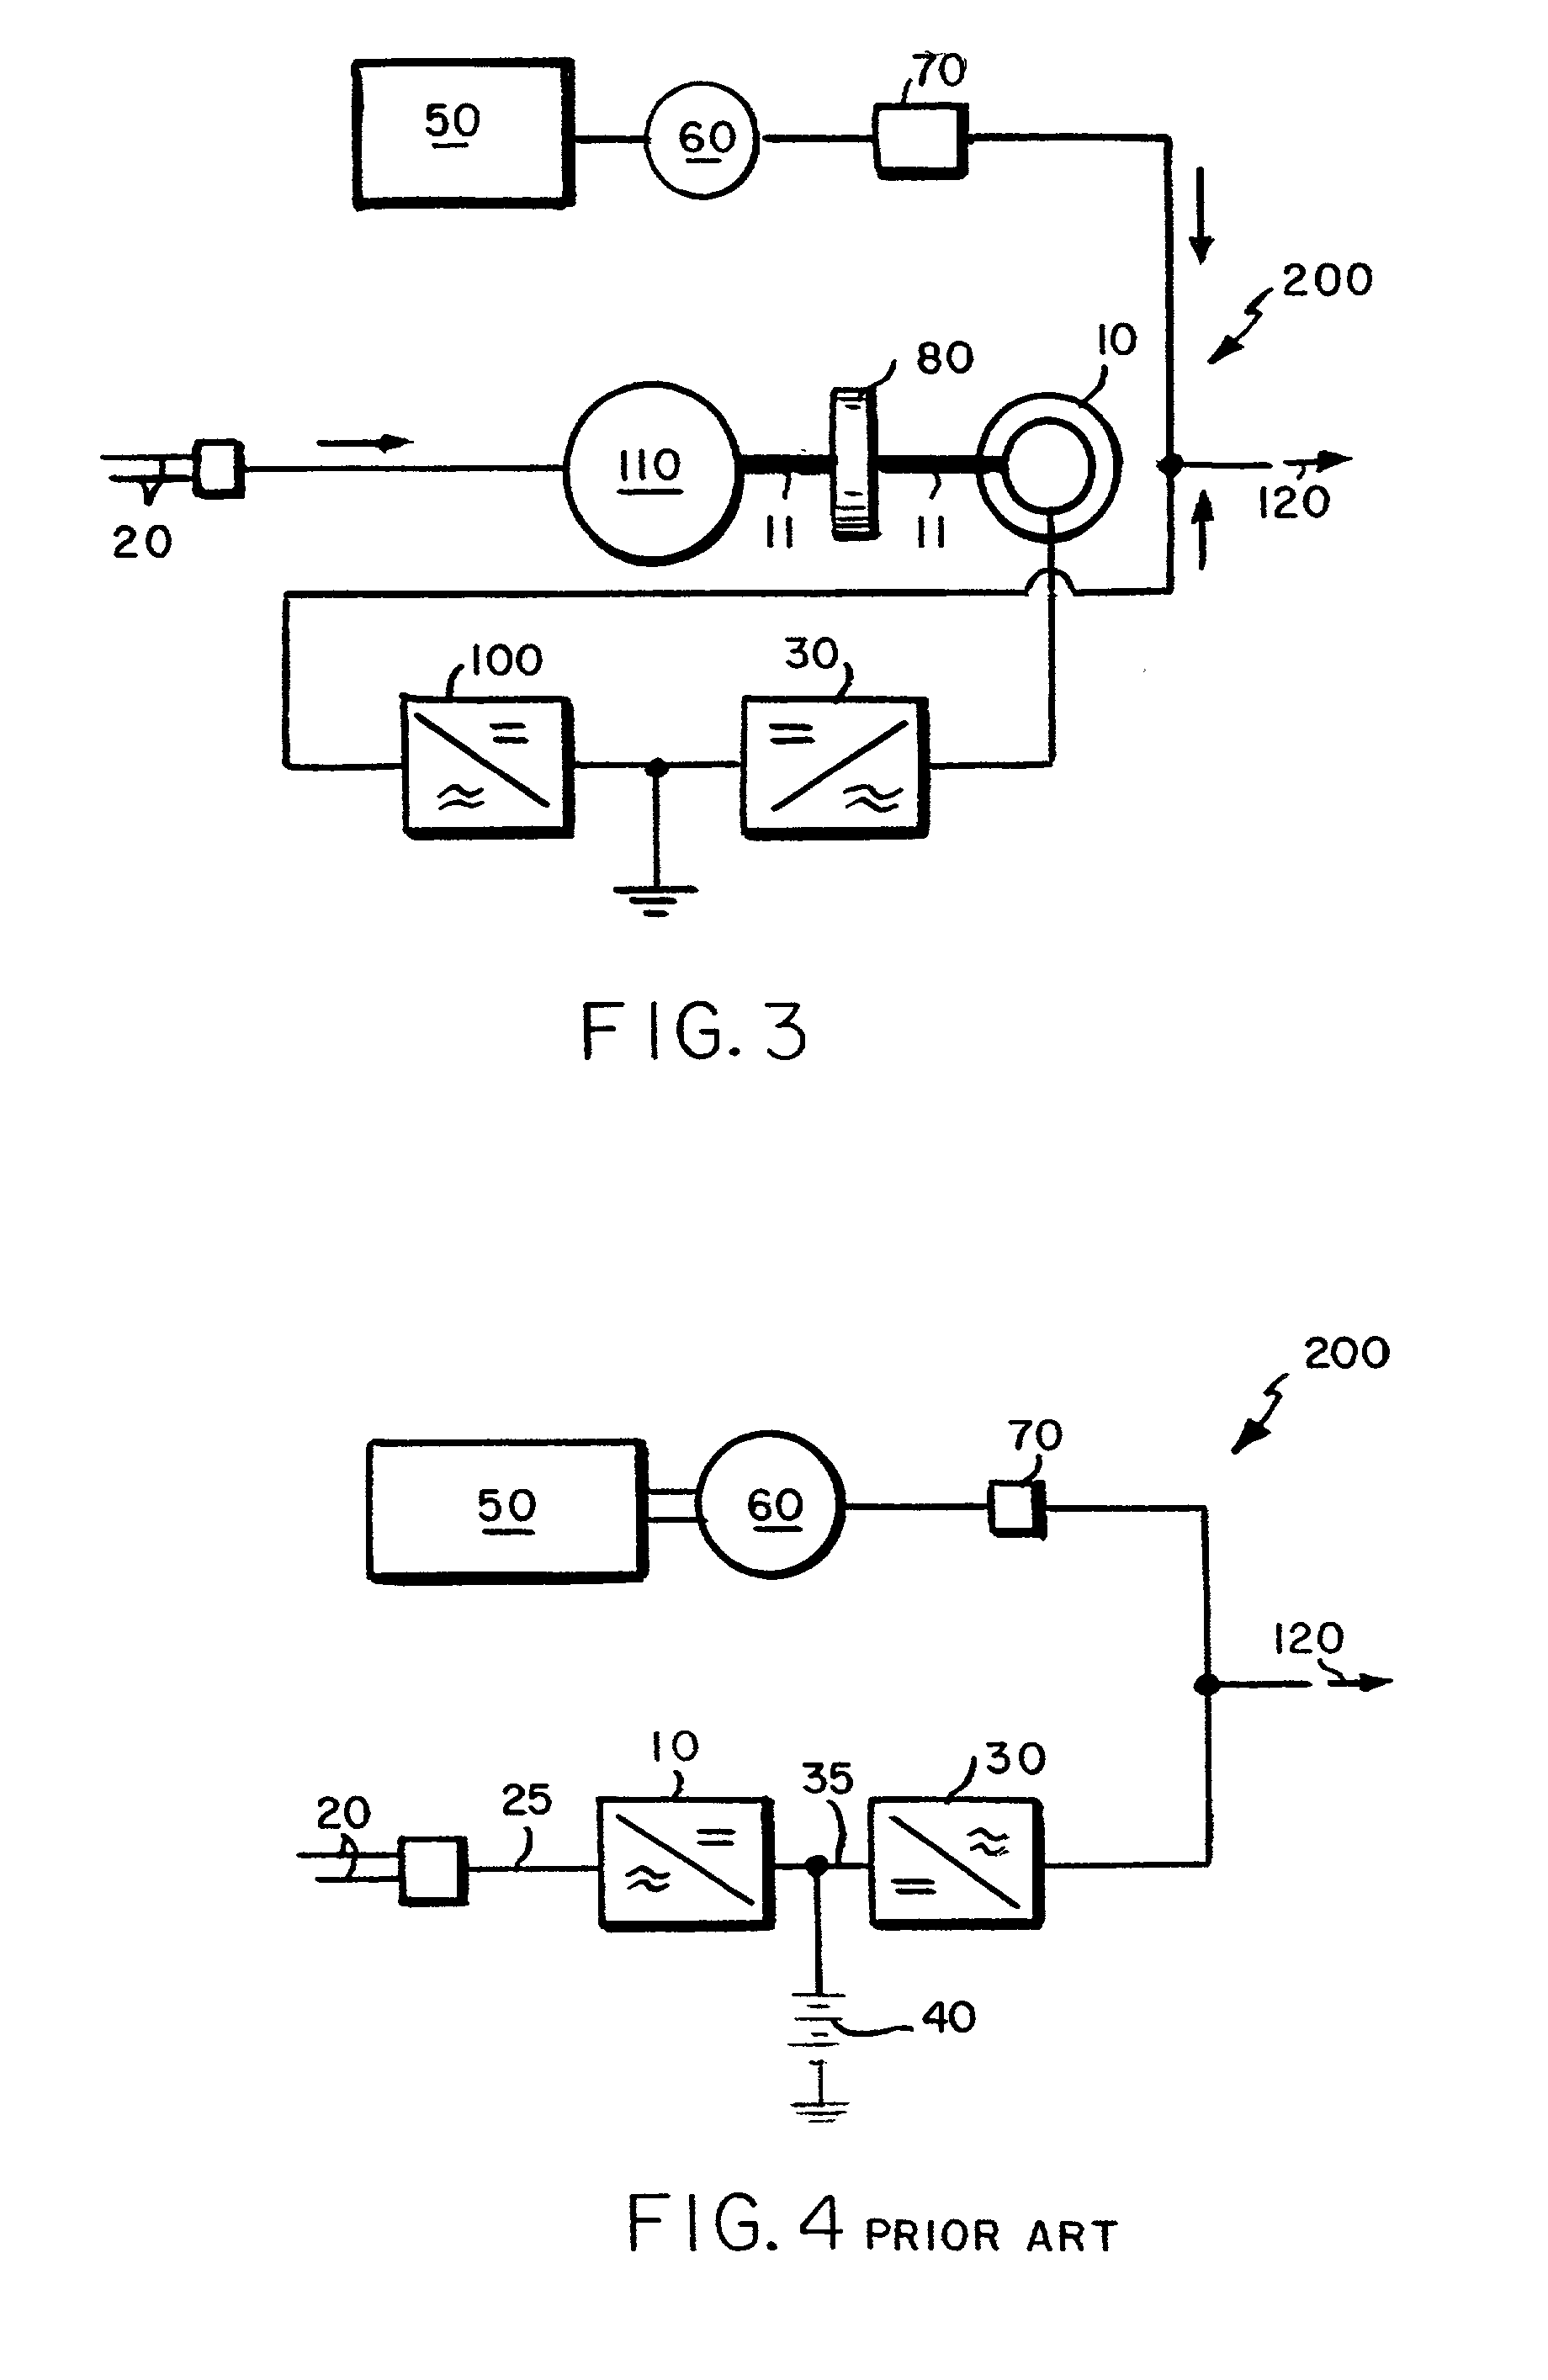 Uninterruptible power supply system using a slip-ring, wound-rotor-type induction machine and a method for flywheel energy storage